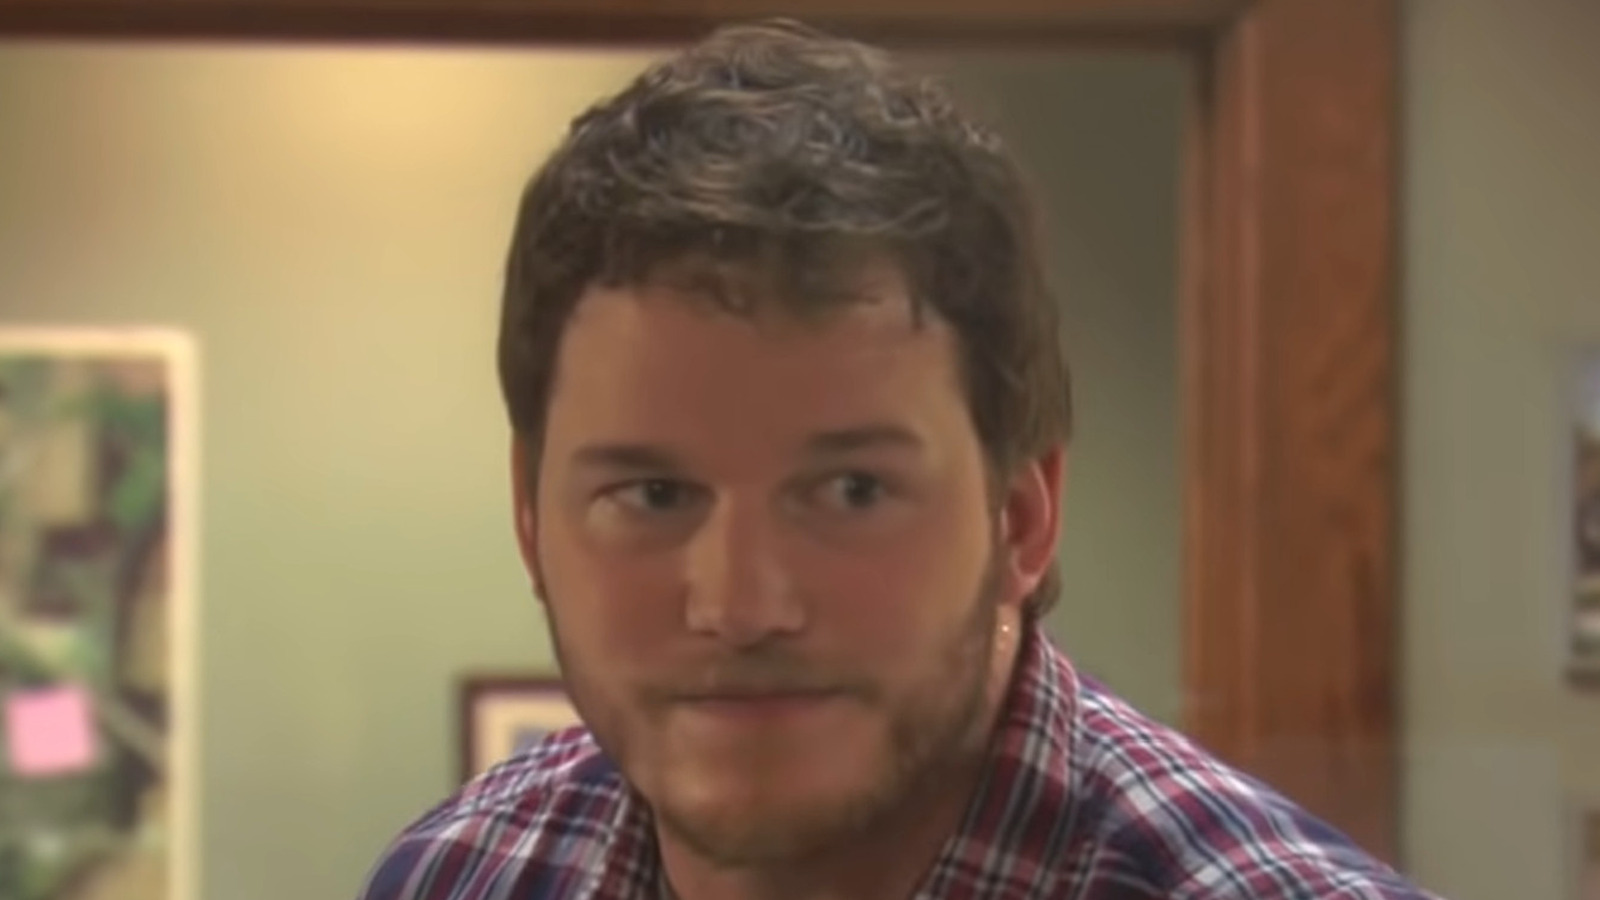 What is the name of the fictional town in 'Parks and Recreation' where Chris Pratt's character lives?